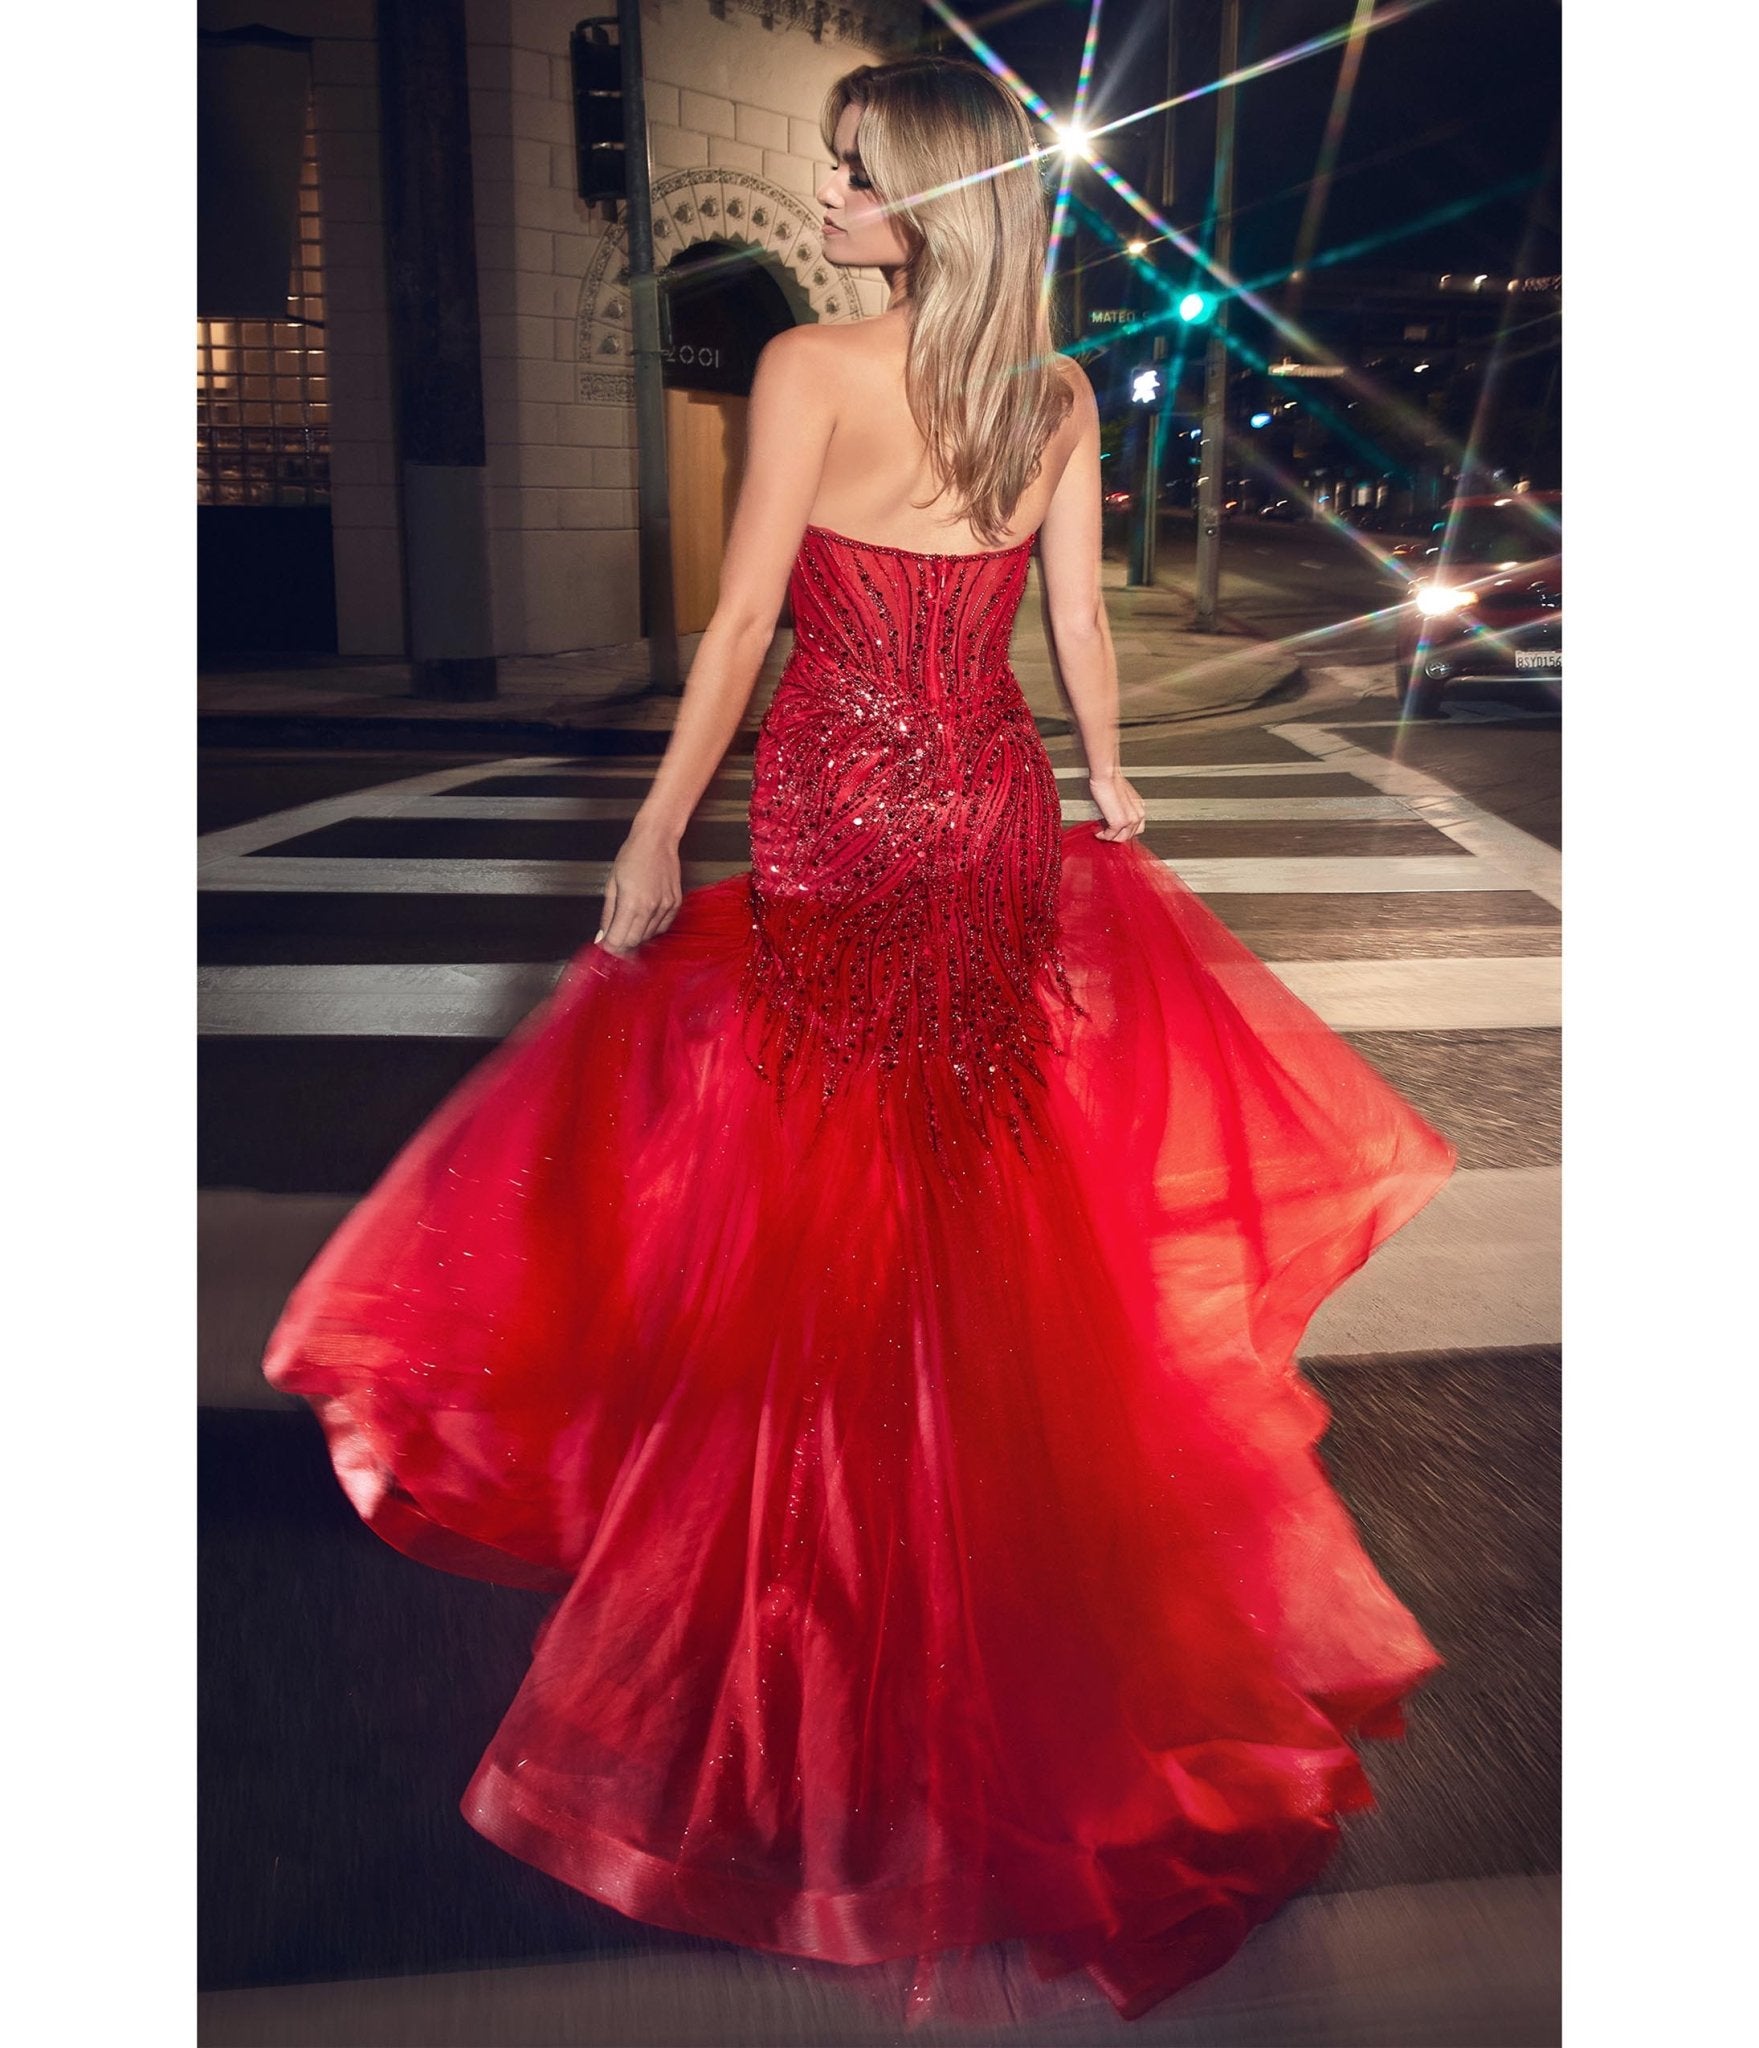 Red Beaded Sequin Strapless Mermaid Prom Dress - Unique Vintage - Womens, DRESSES, PROM AND SPECIAL OCCASION